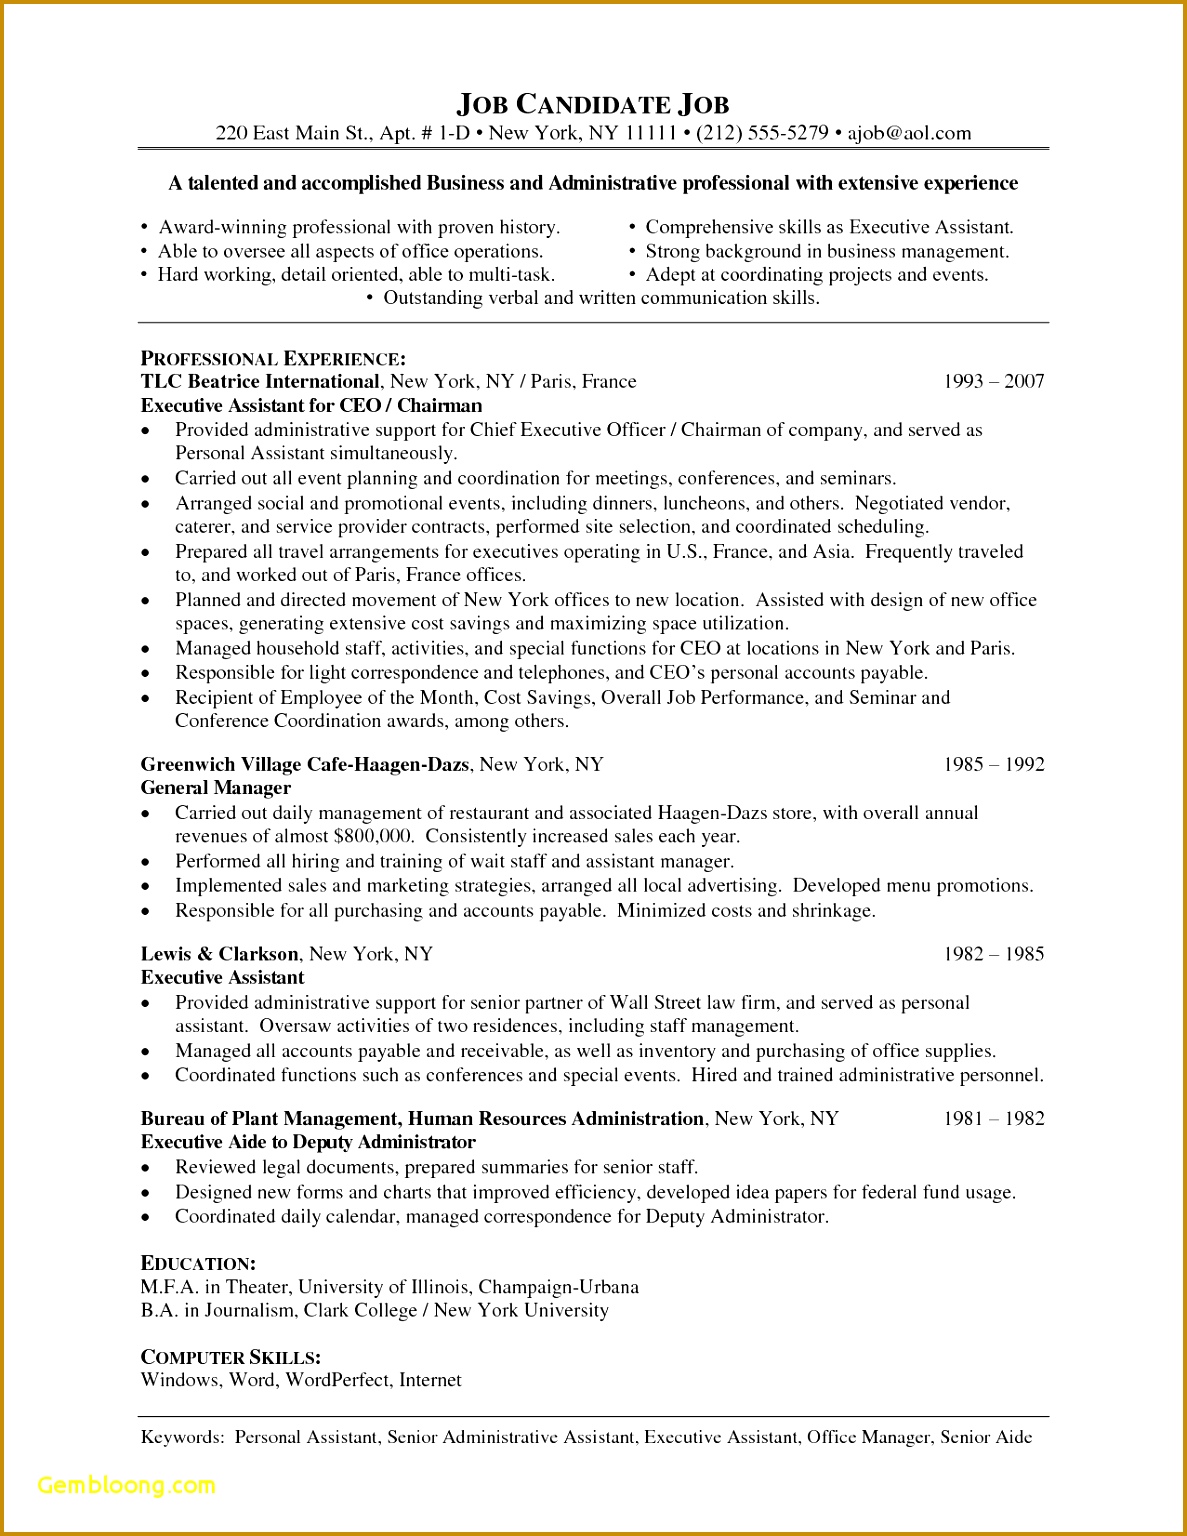 Resume for An Administrative assistant Free Download Executive Resume Templates Word Od Specialist Cover Letter Lead 11871536